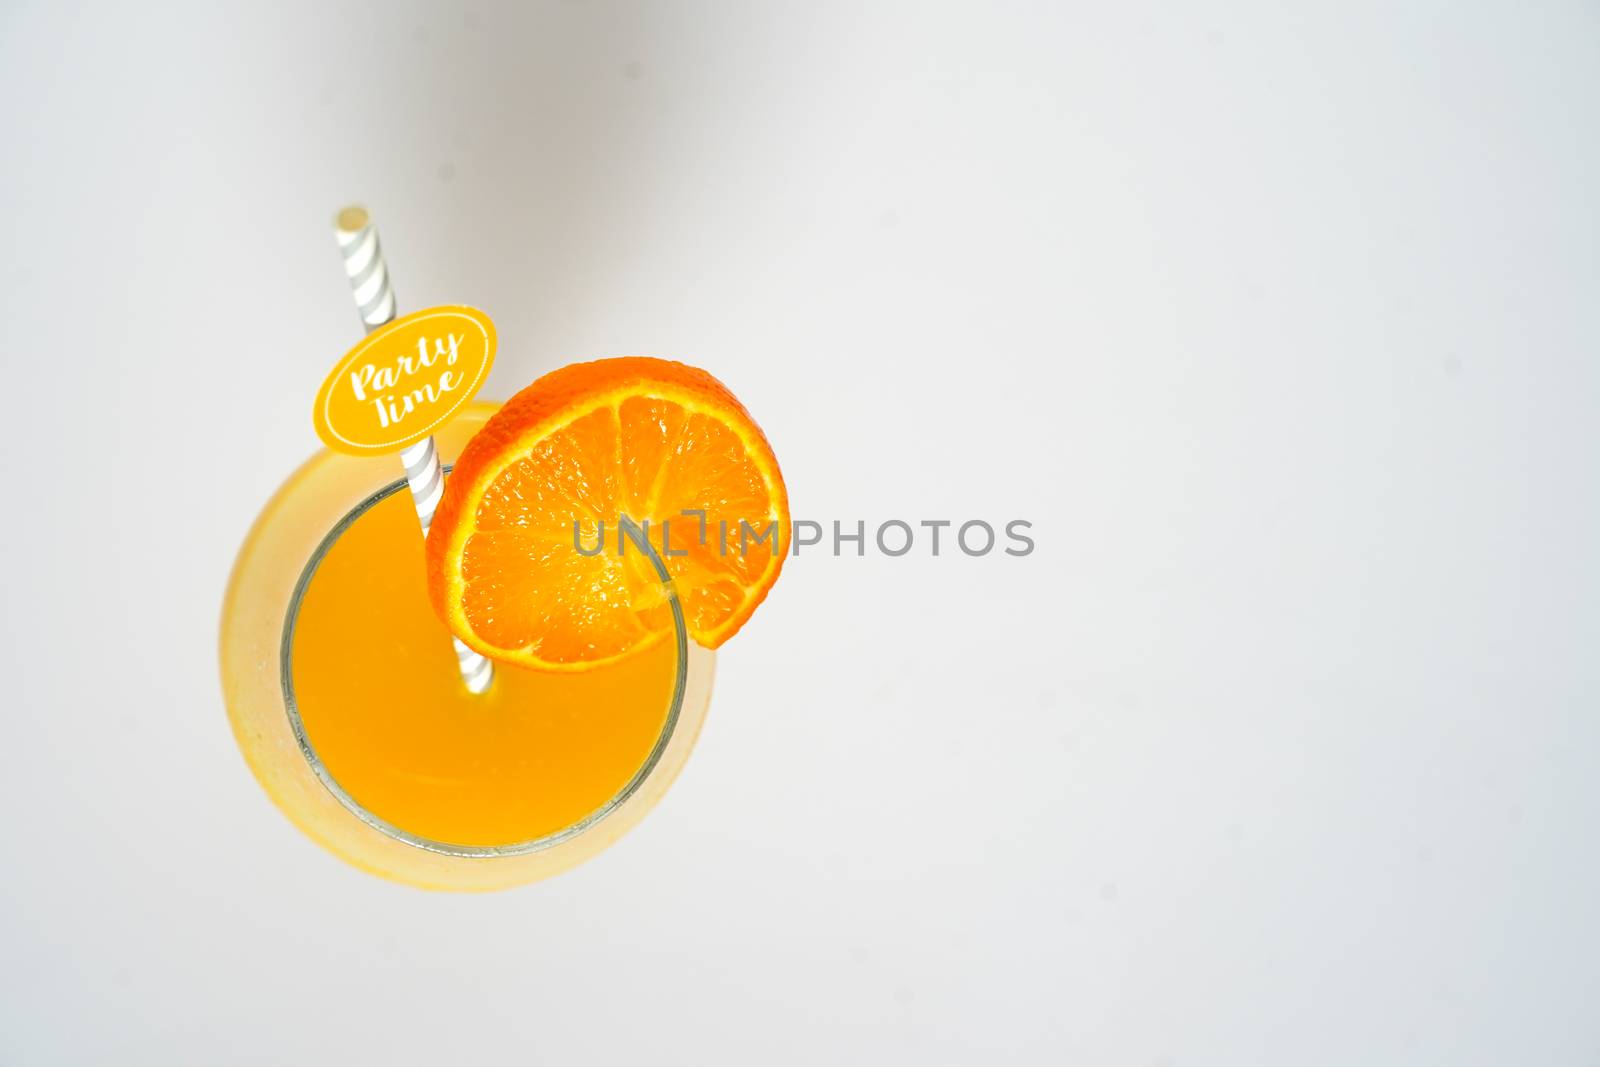 An orange cocktail drink with a party straw against a plain white background